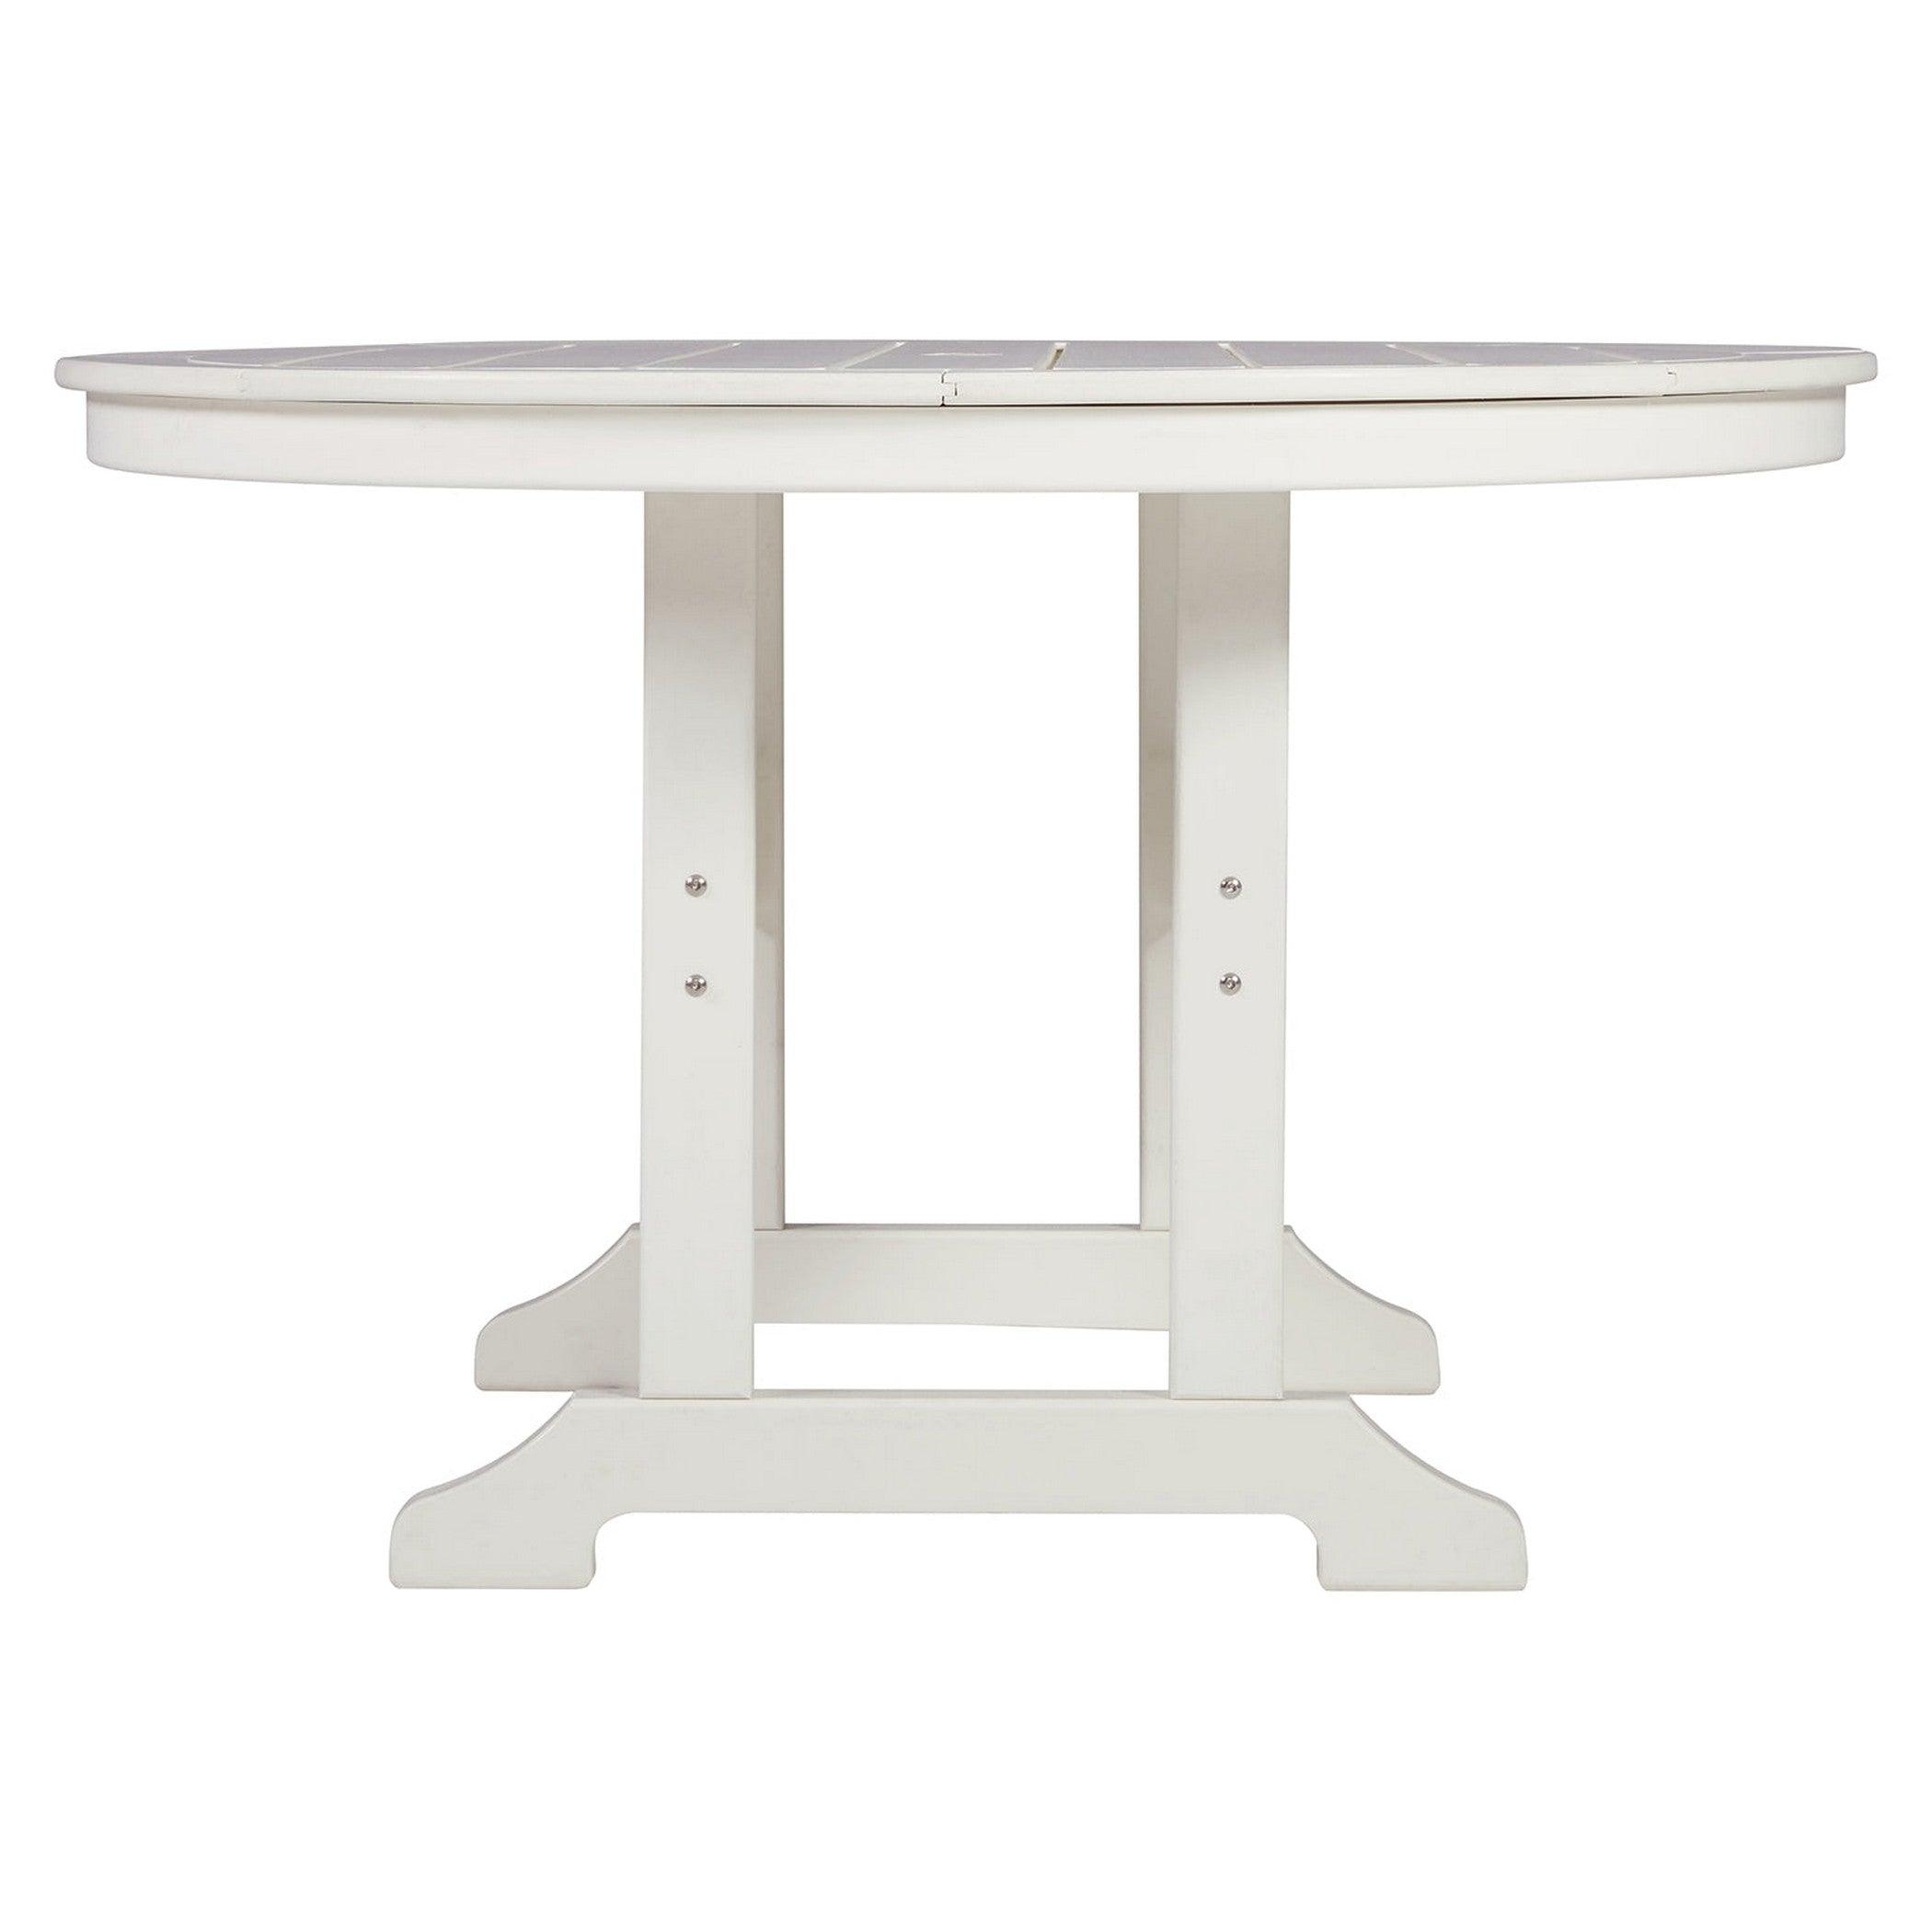 Crescent Luxe Outdoor Dining Table Ash-P207-615